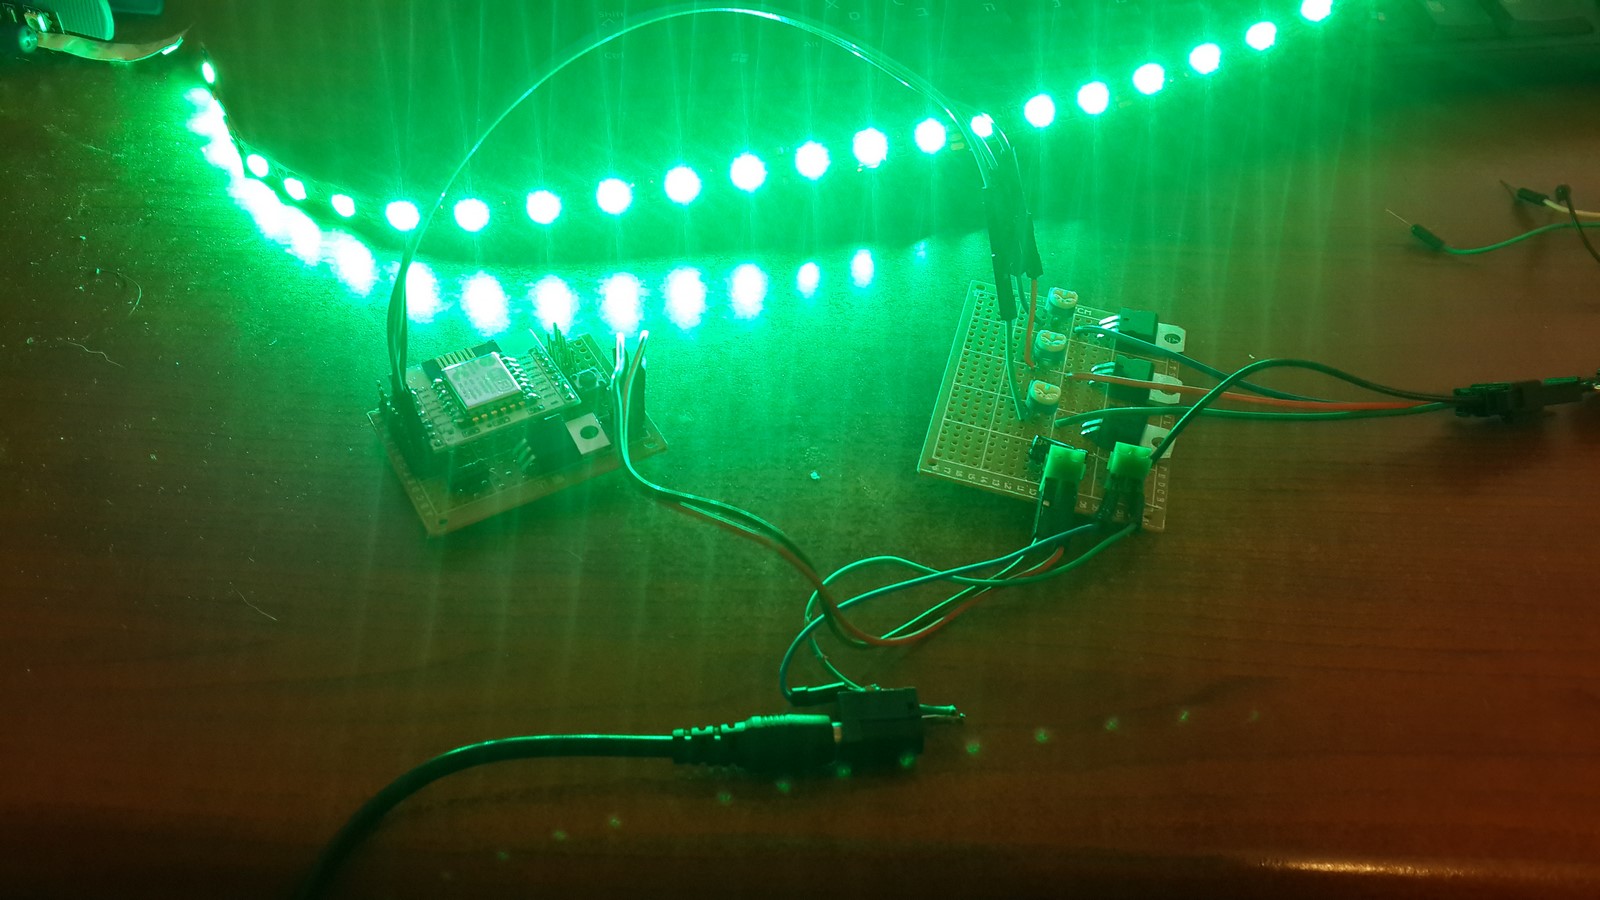 Soldered boards Led driver and ESP12e test